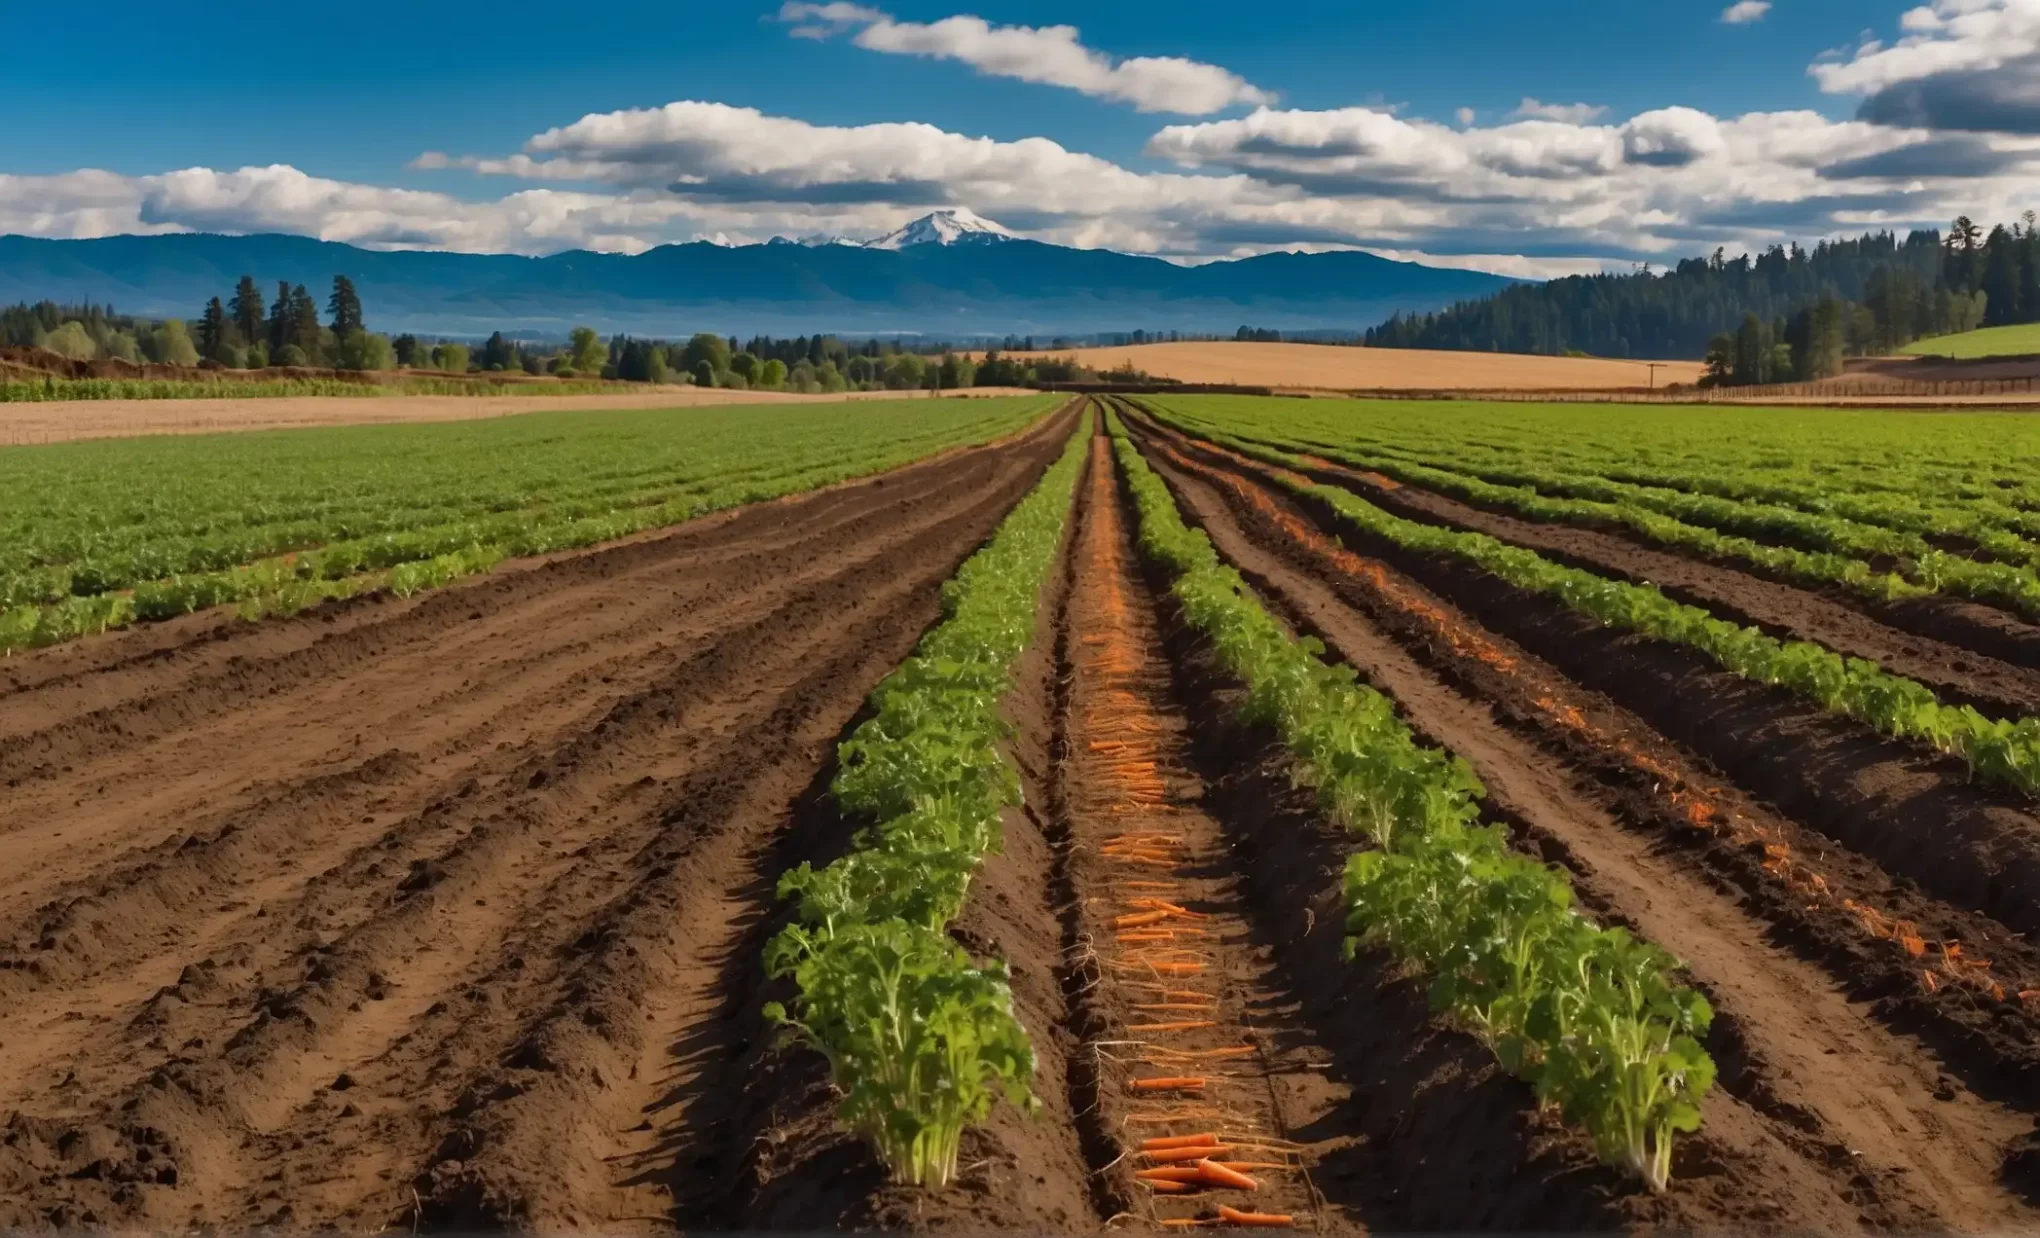 Planting carrots in Oregon